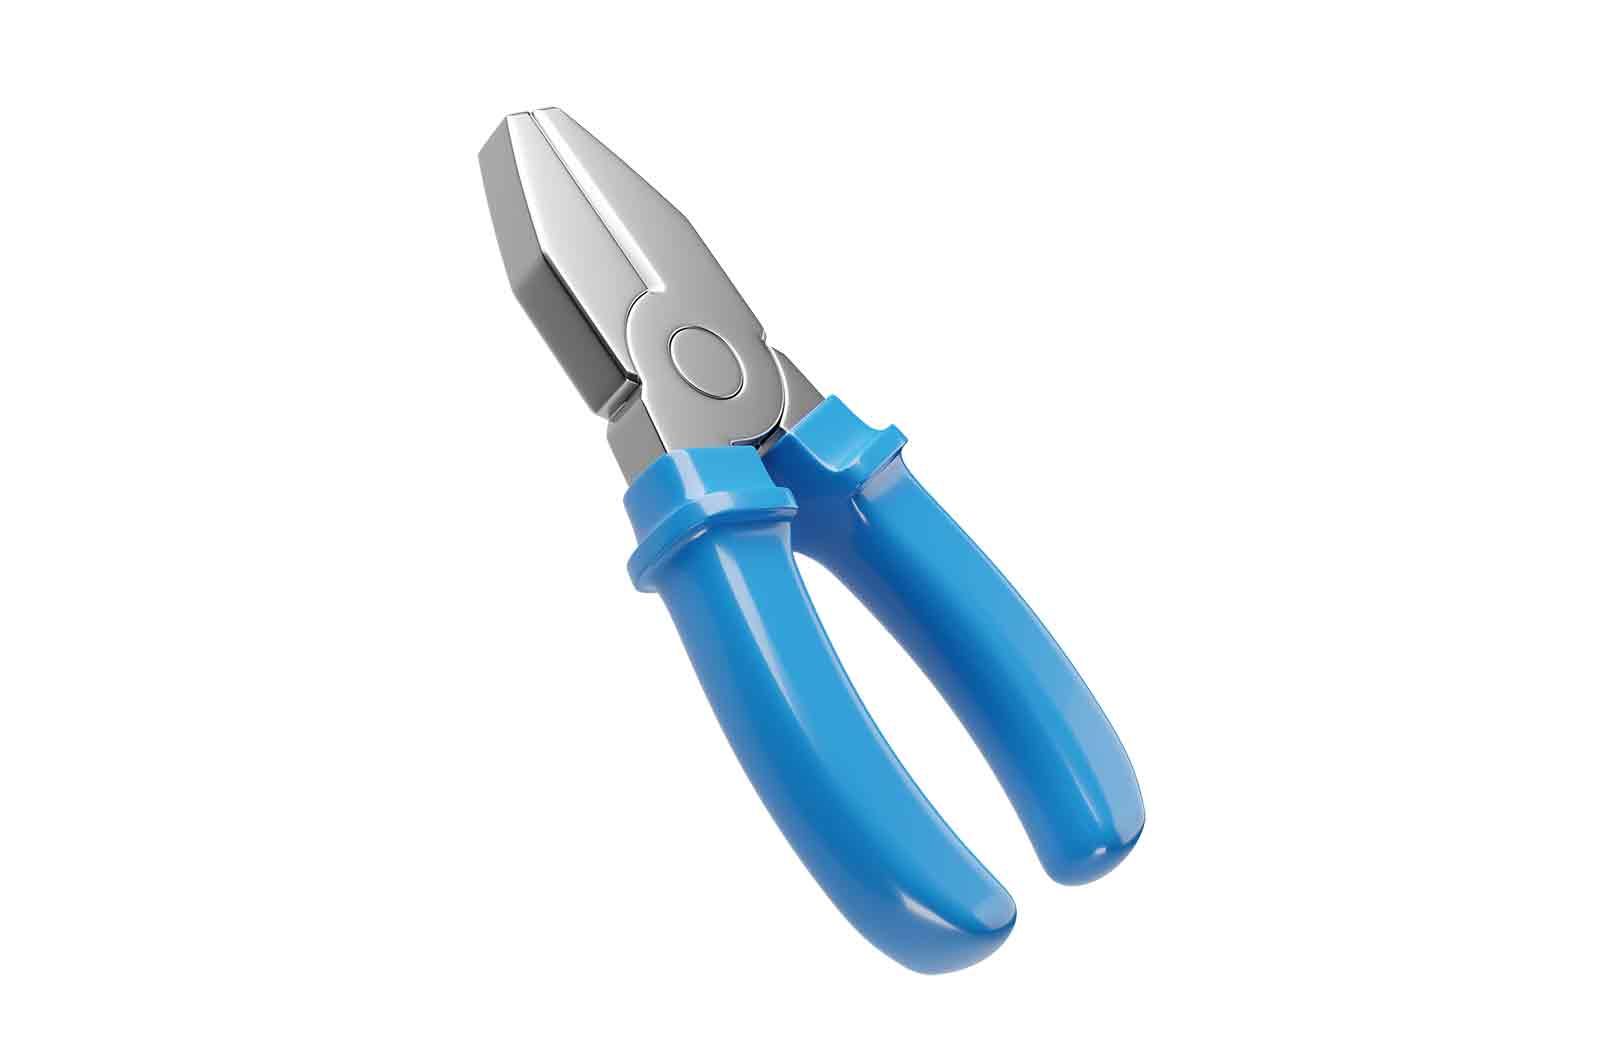 Blue pliers on white background, 3d rendered illustration. A hand tool used for gripping, bending, or cutting wires and other materials.